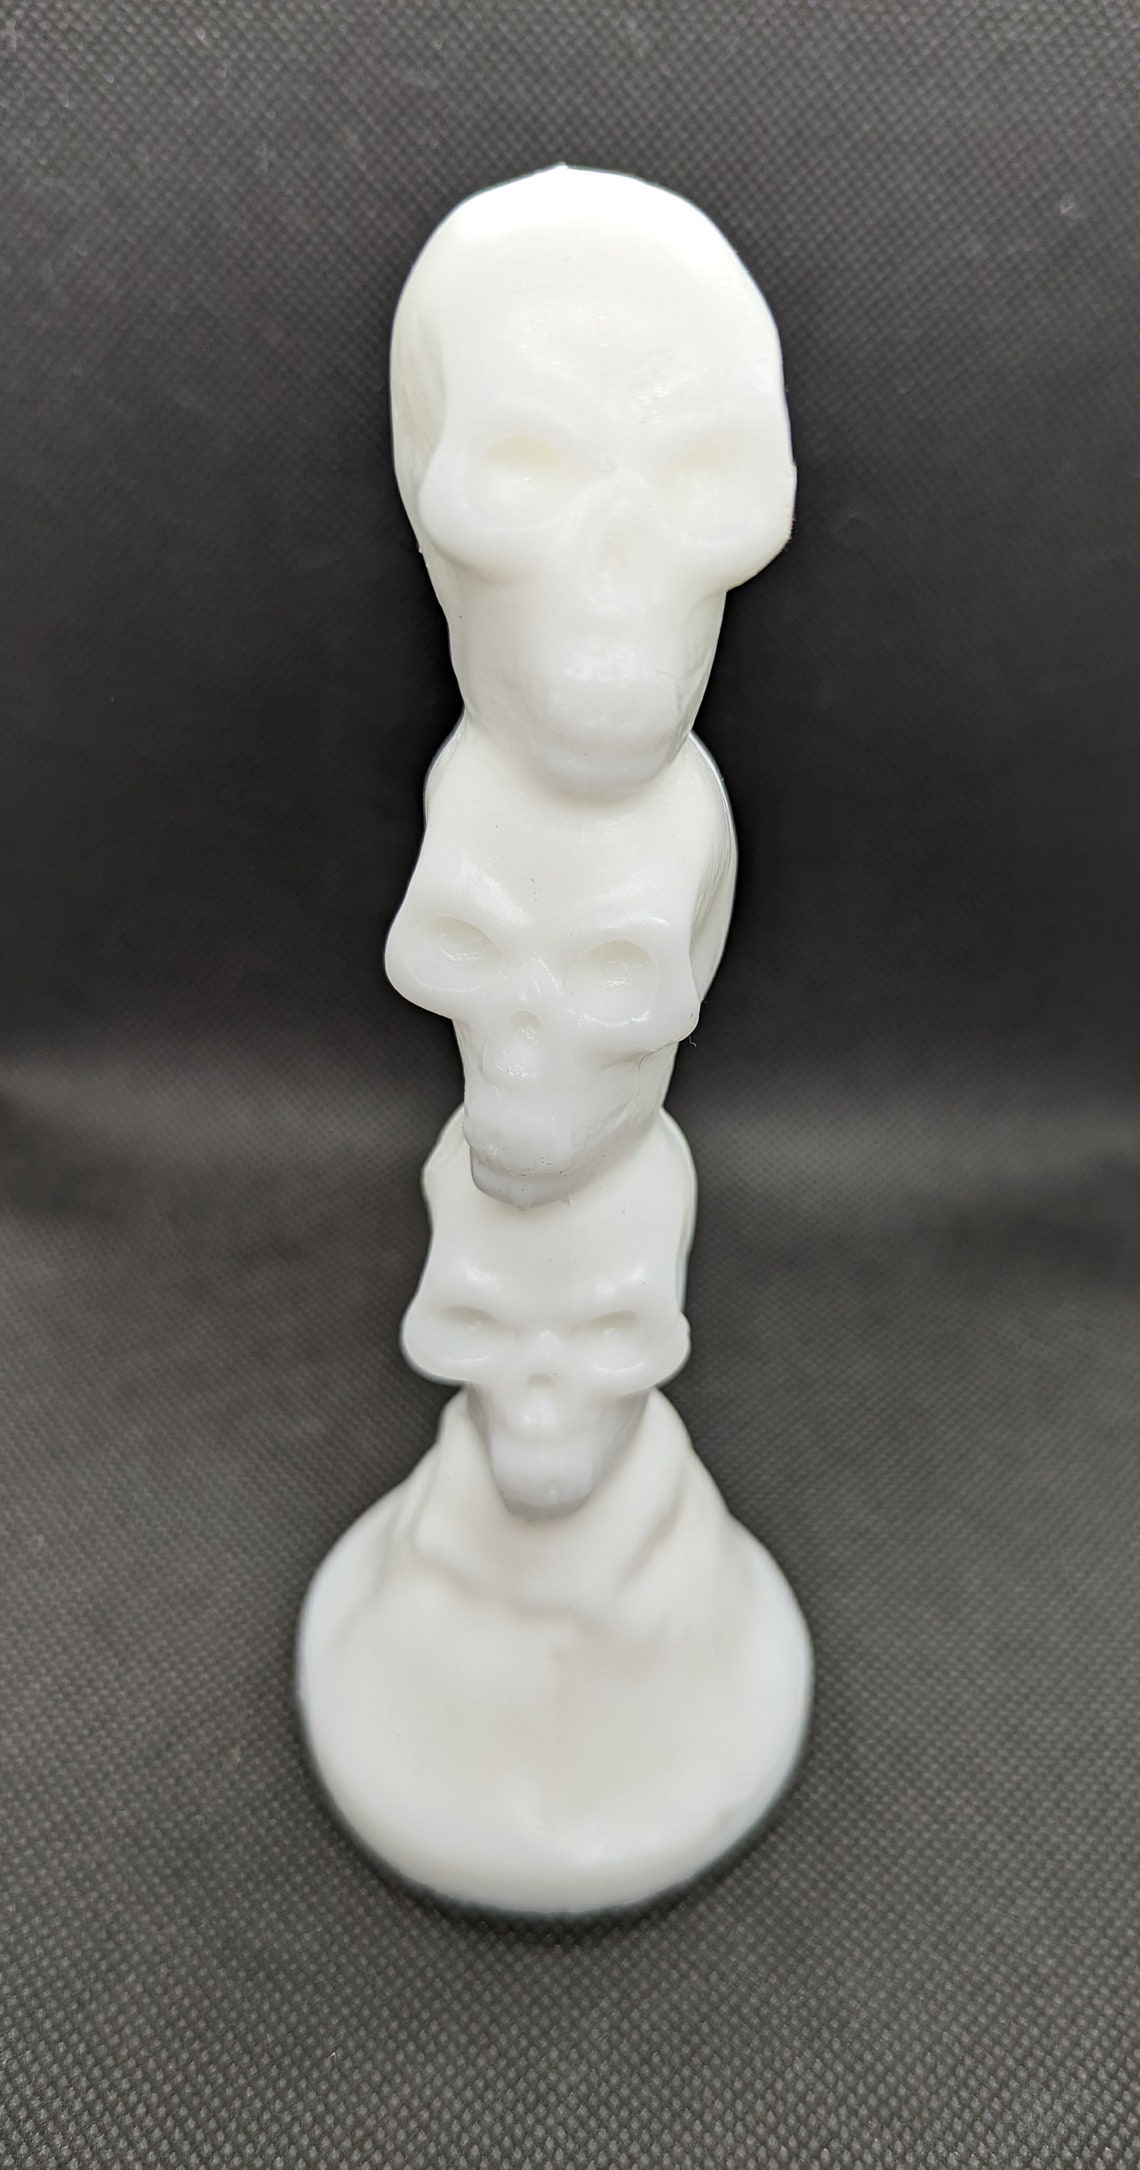 Skelly the Skull Gothic Insertable Silicone Dildo Penetration - Etsy